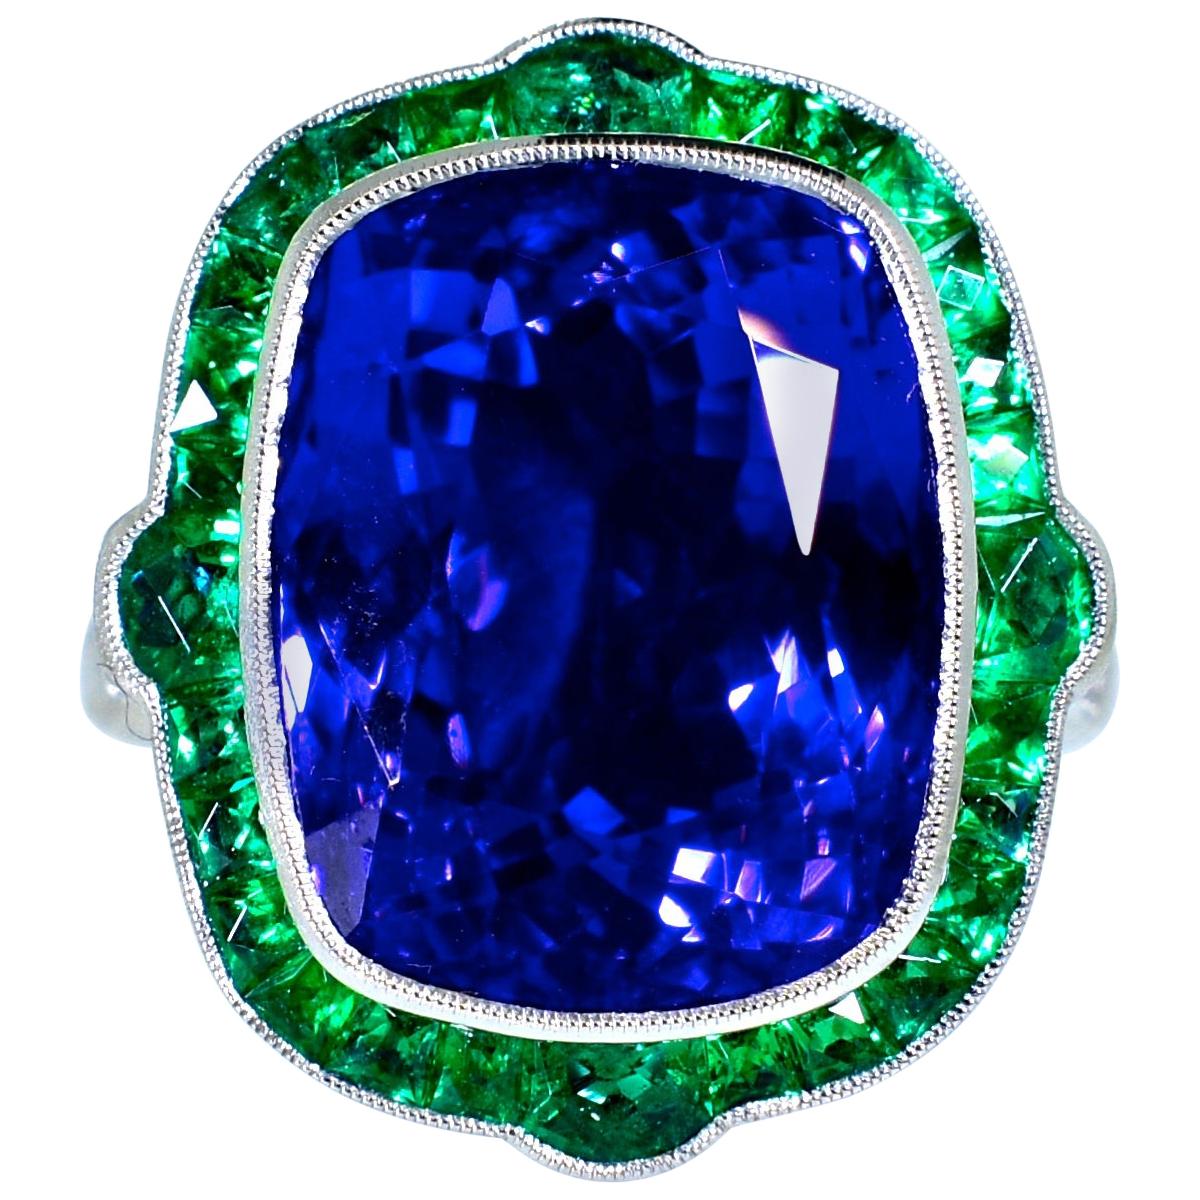 Fancy French cut natural Colombian emeralds displaying a bright green clear color surround one of the finest natural large Tanzanites we have encountered. This stone has a pure deep but exceedingly bright blue color with a slight hint of purple. 